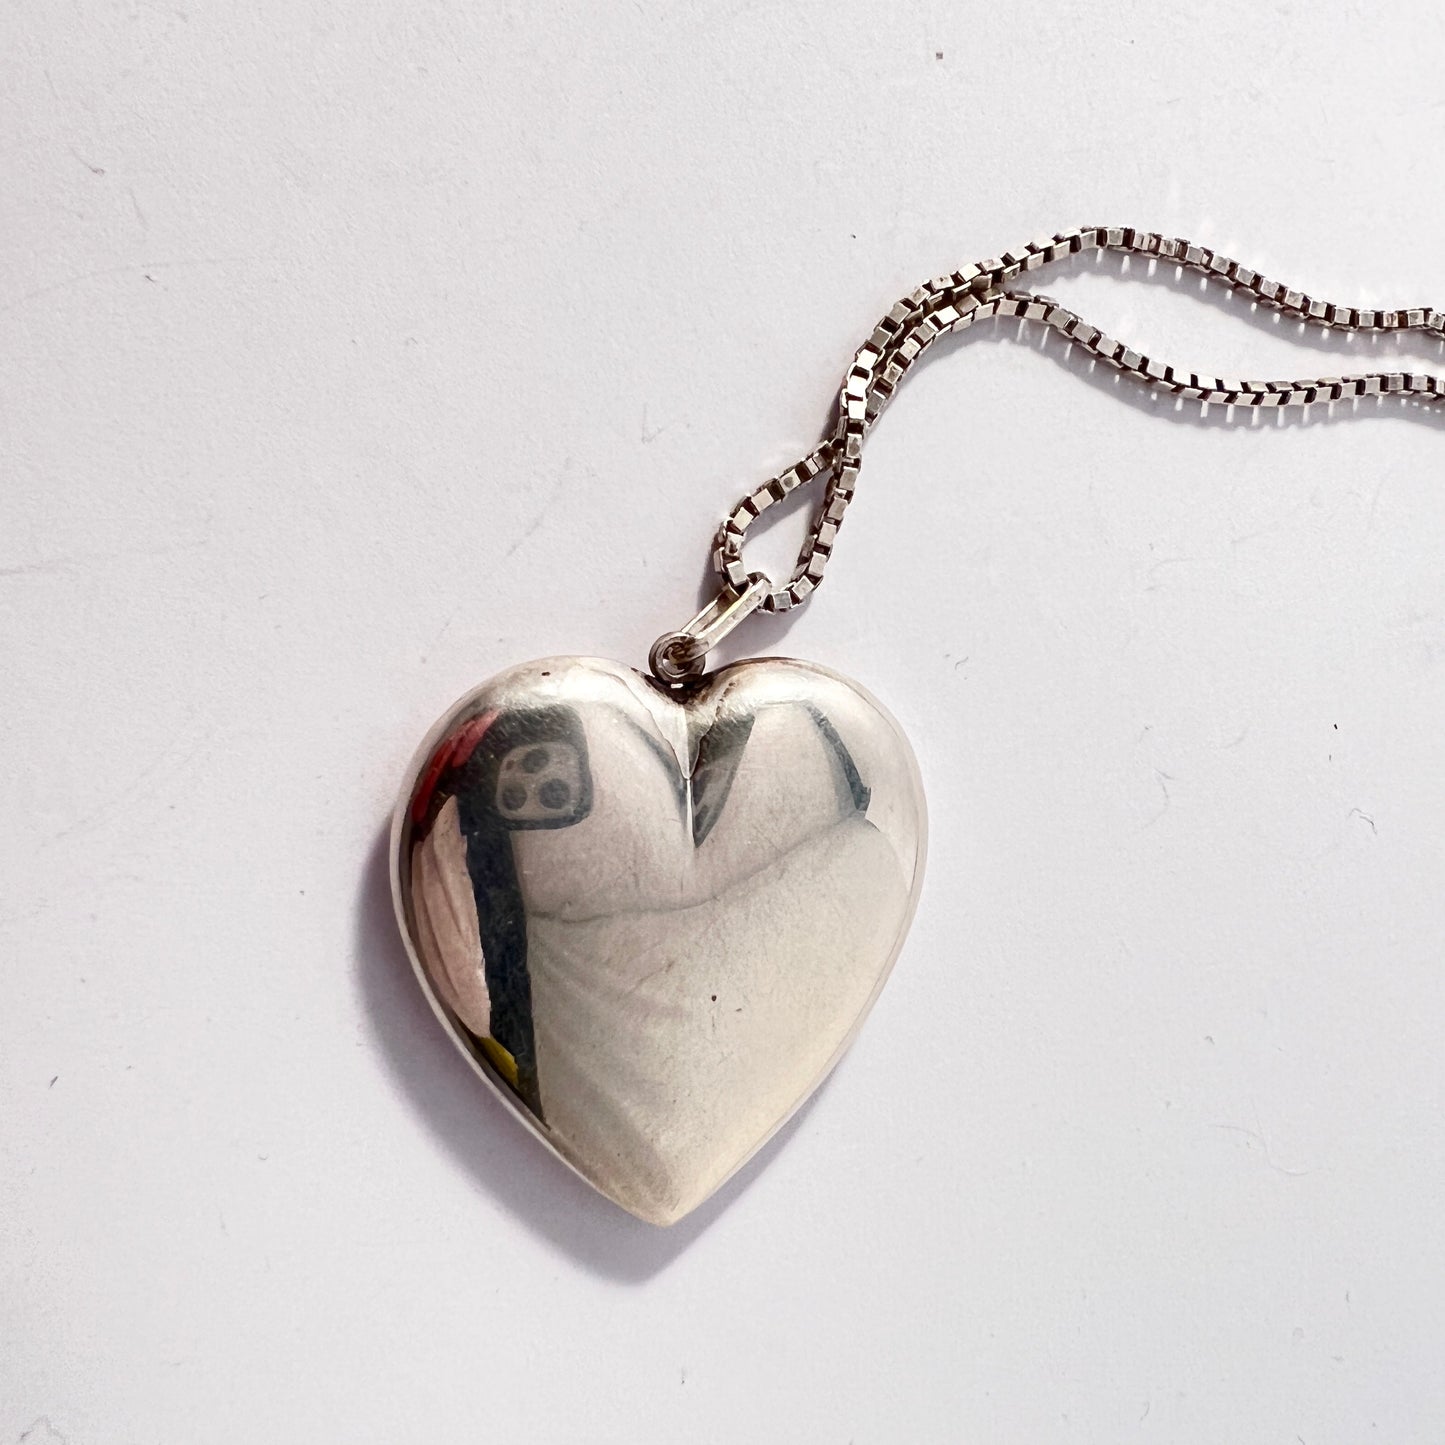 Italy, Vintage Sterling Silver Heart Love Pendant Necklace.